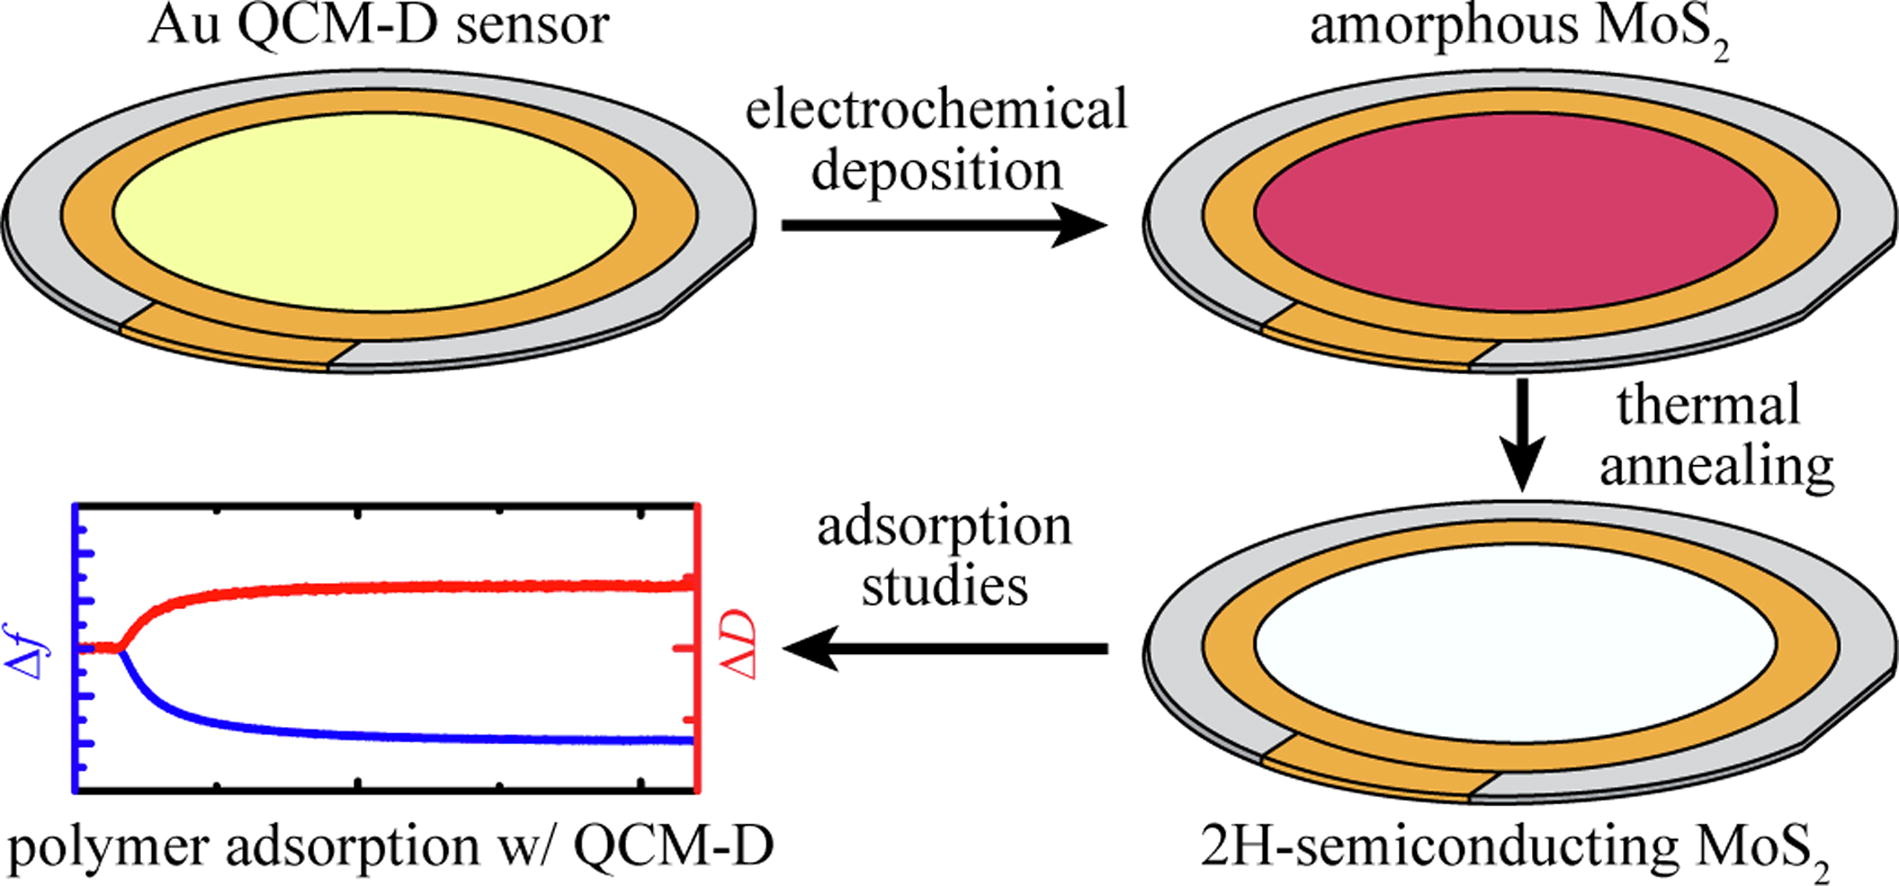 Electrochemically deposited molybdenum disulfide surfaces enable polymer adsorption studies using quartz crystal microbalance with dissipation monitoring (QCM-D)